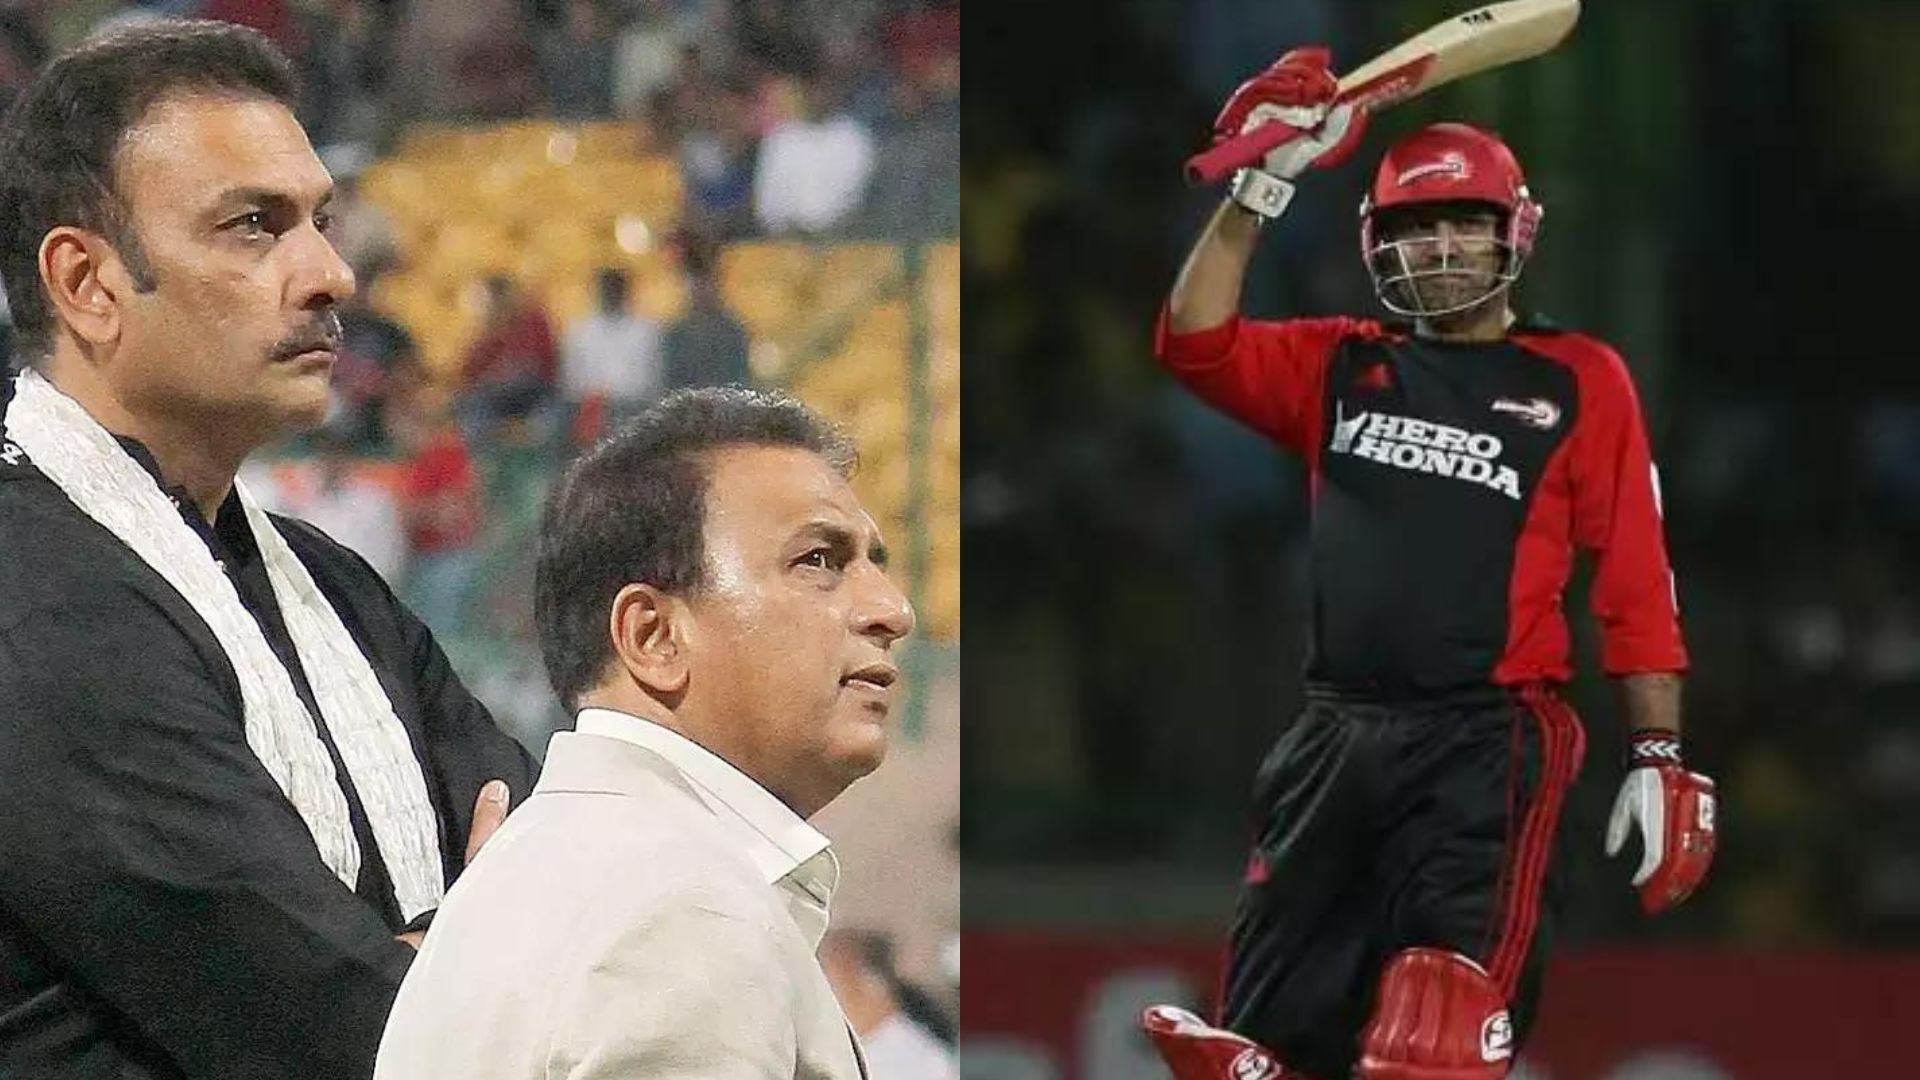 Virender Sehwag opened up on how he was persuaded to participate in the IPL (P.C.:Twitter)